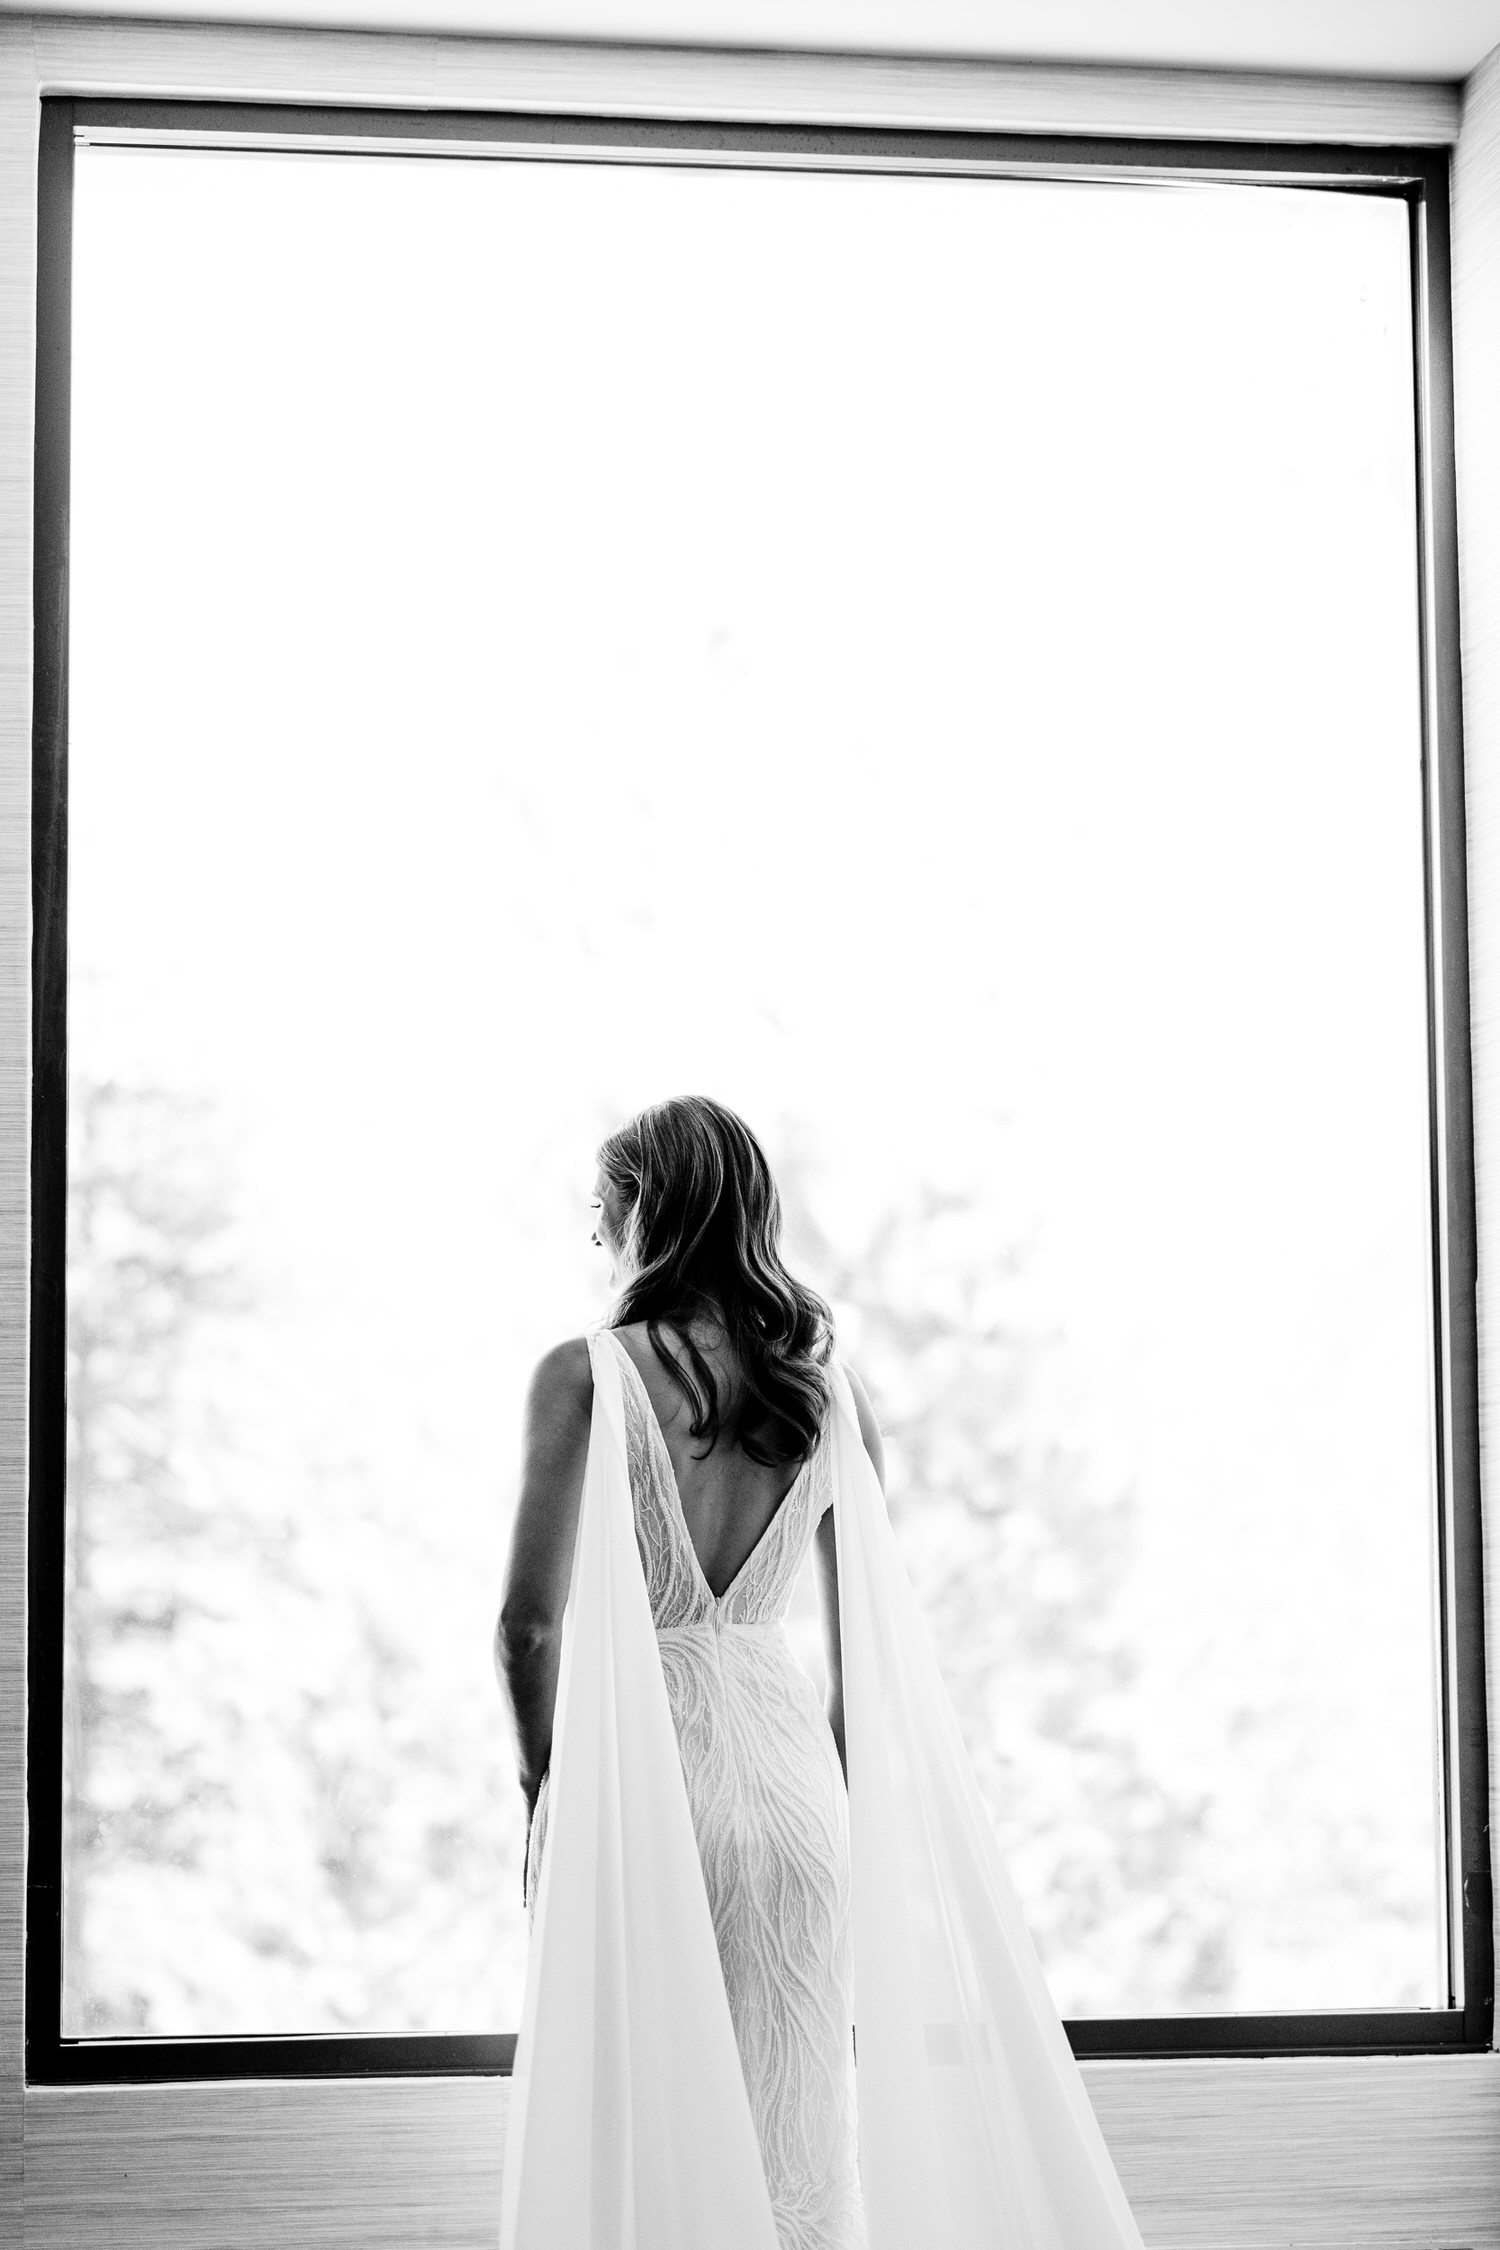 Minimalist black and white portrait of a bride standing in front of a large window, wearing a white dress with bridal wings pinned to the shoulders.